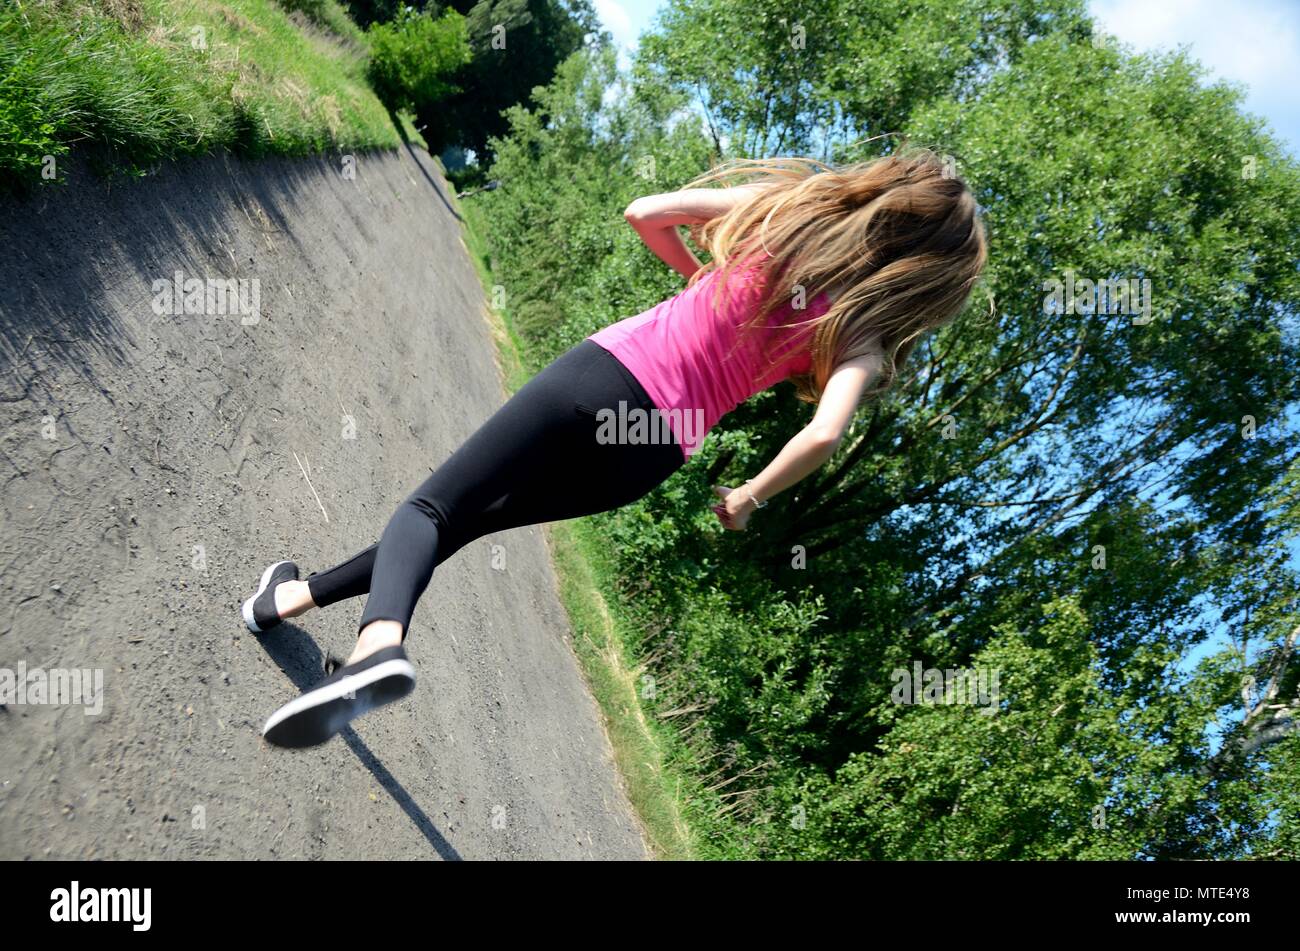 Young female runner. Woman runs on dirt road surrounded by green trees. Photo from behind, without face. Stock Photo